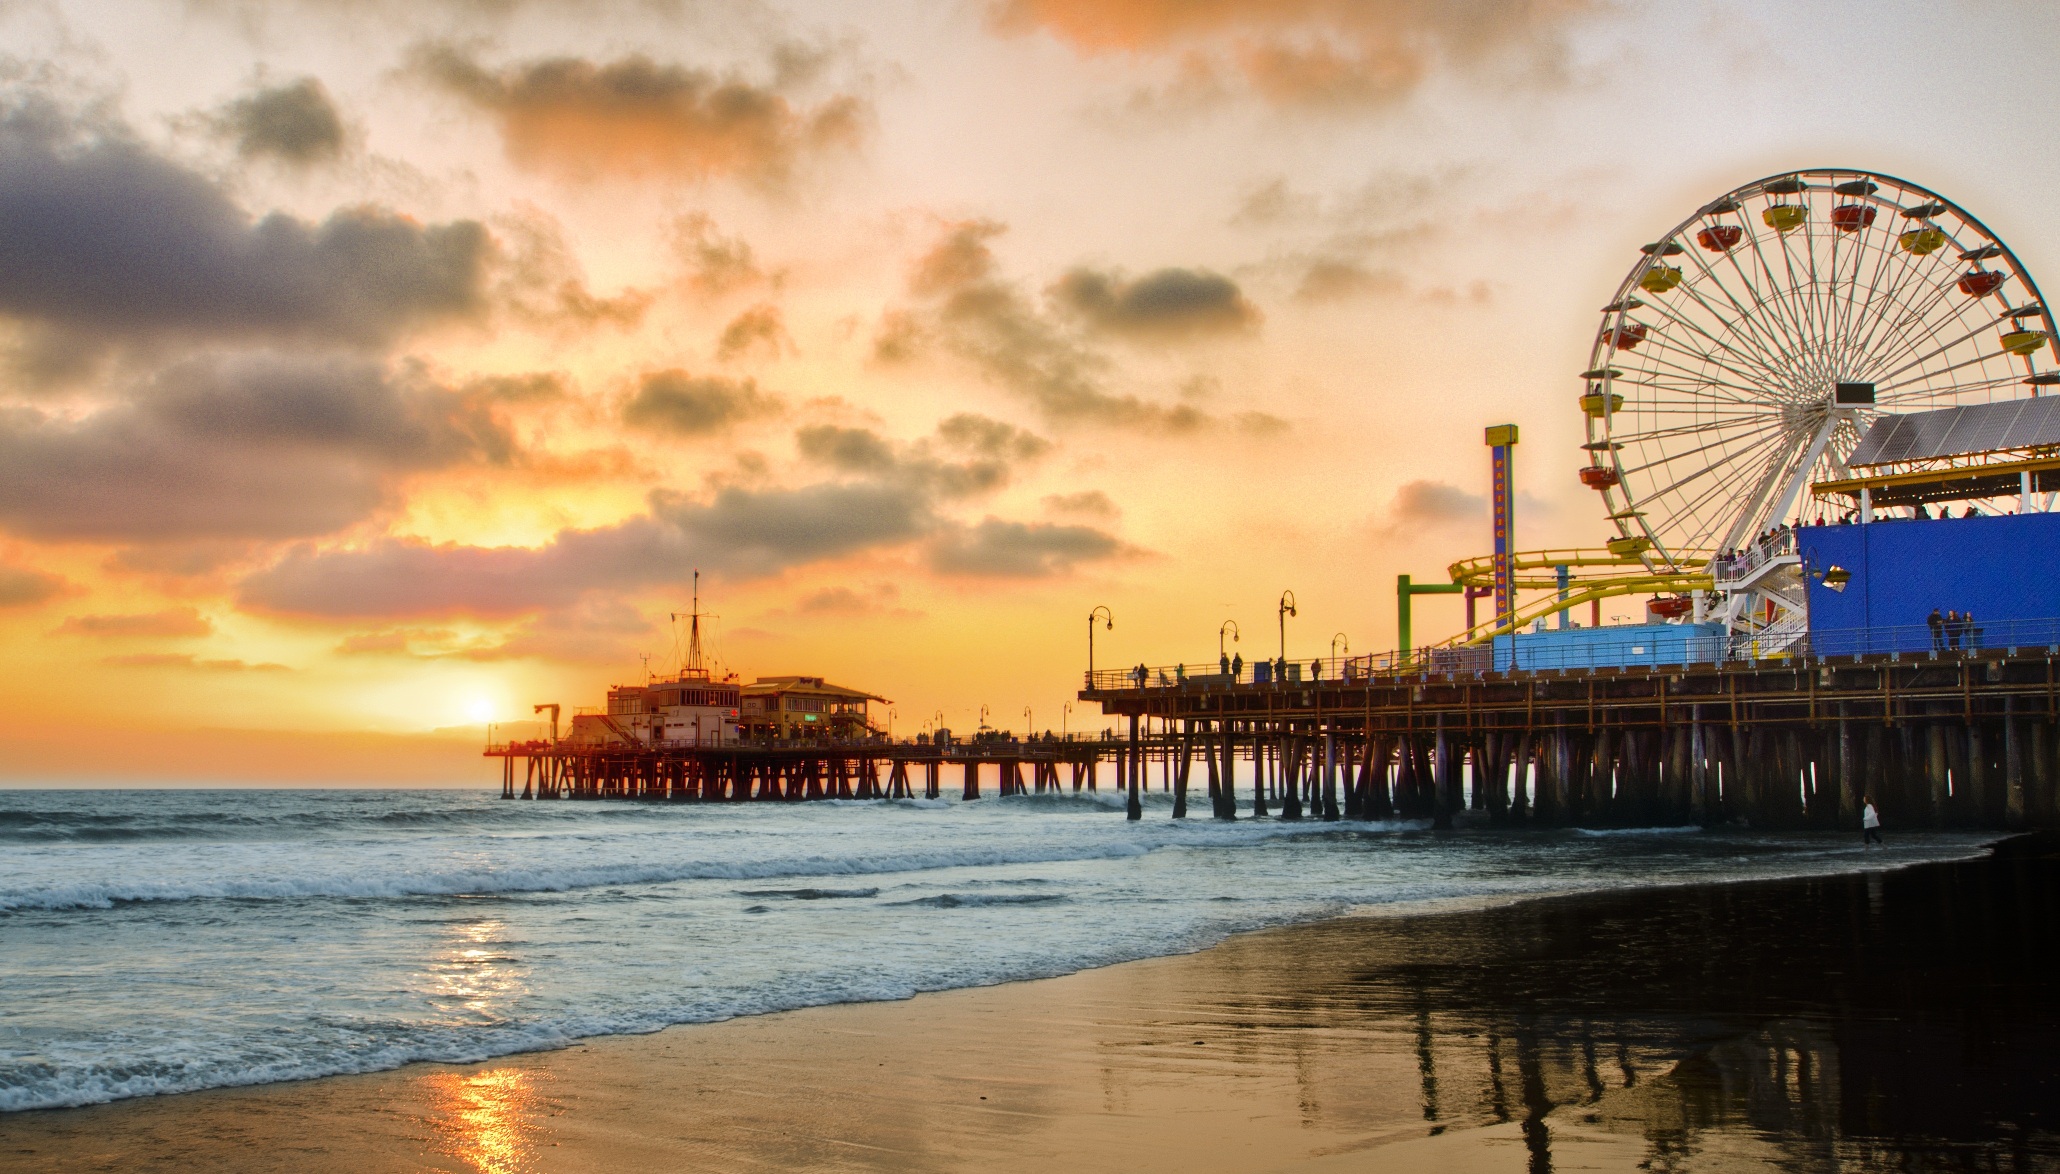 5 Things to do in Santa Monica